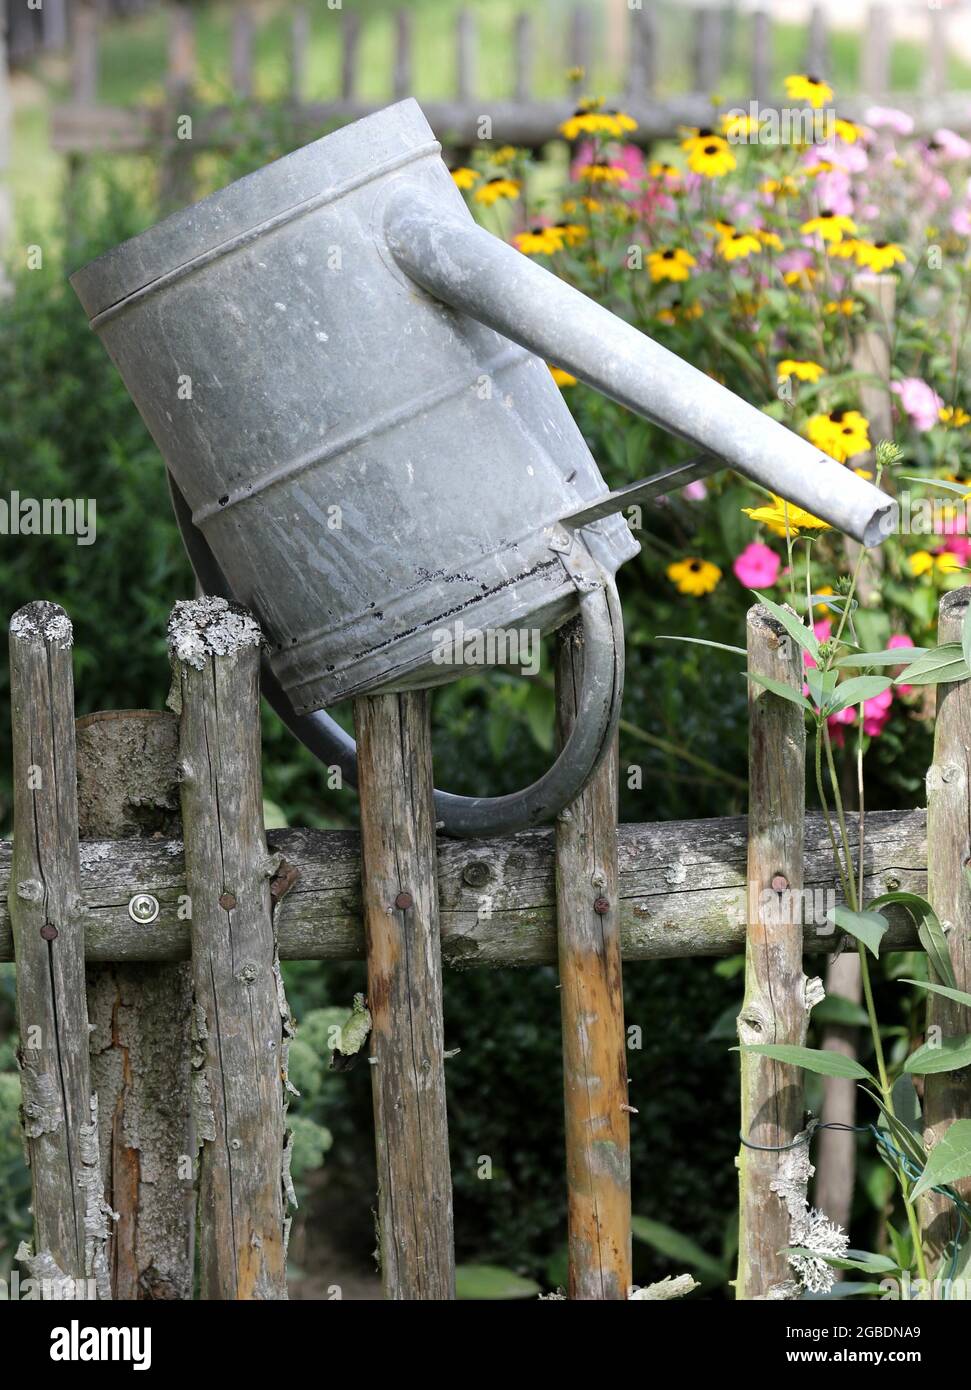 Bucket upside down on a fence Stock Photo